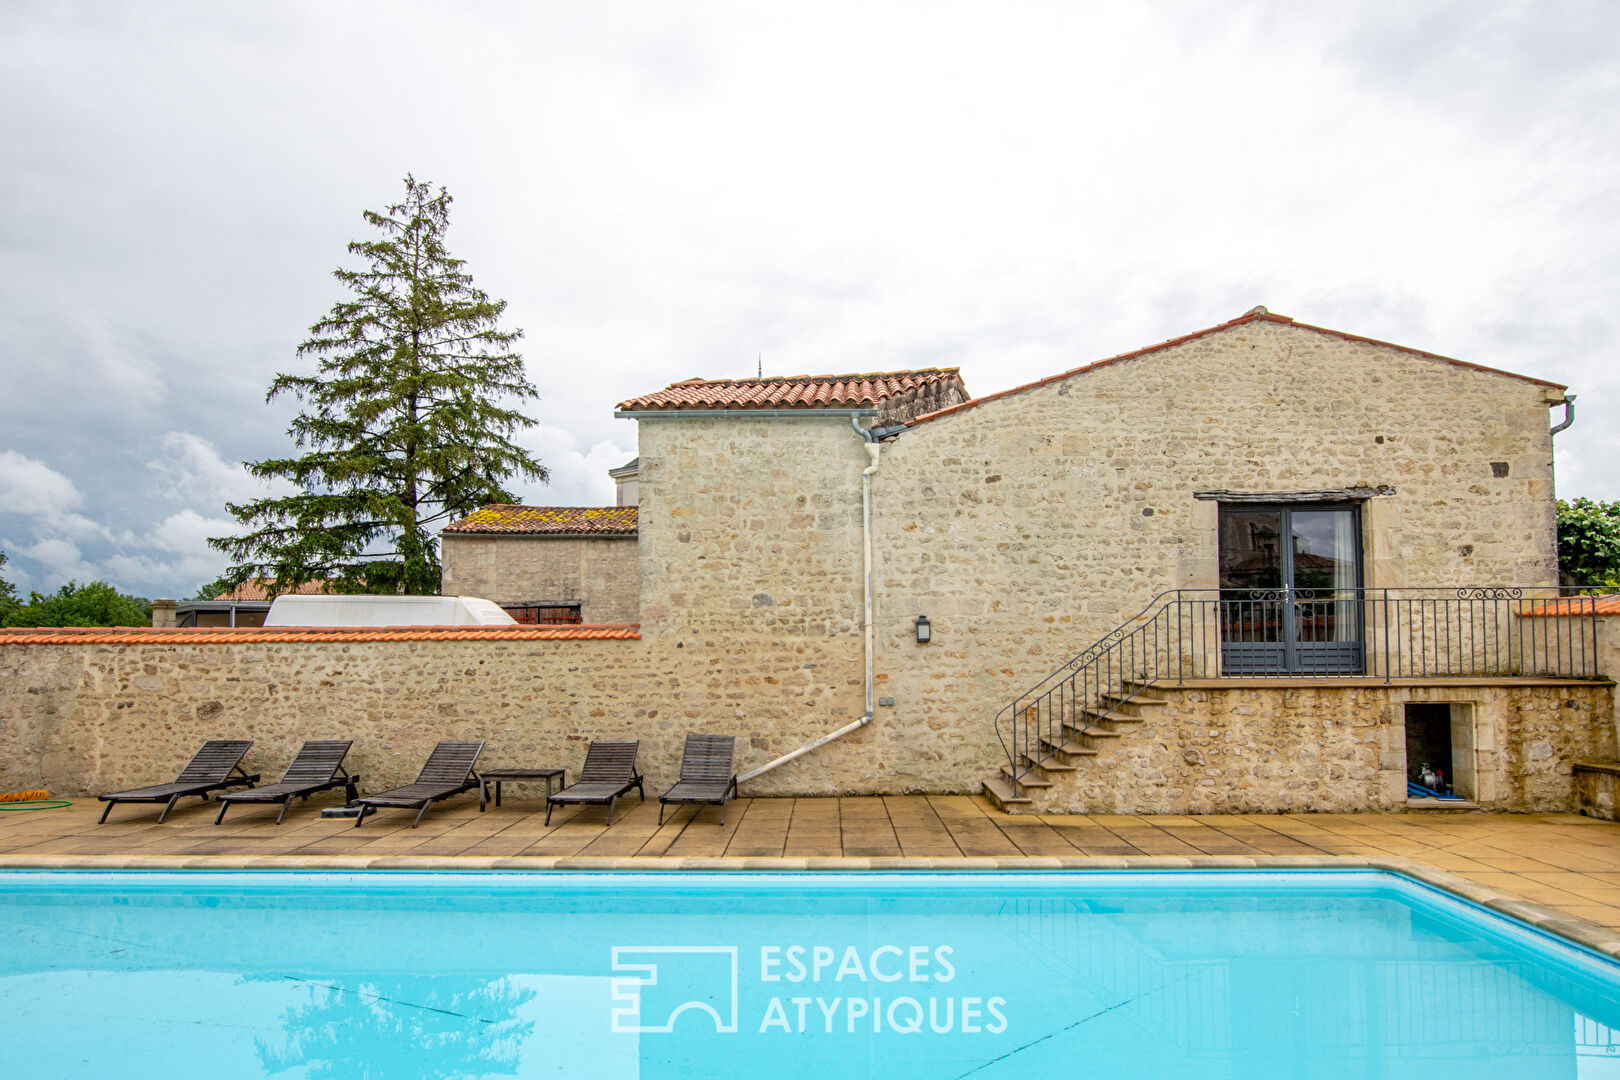 Superb bourgeois residence in the heart of the village with swimming pool